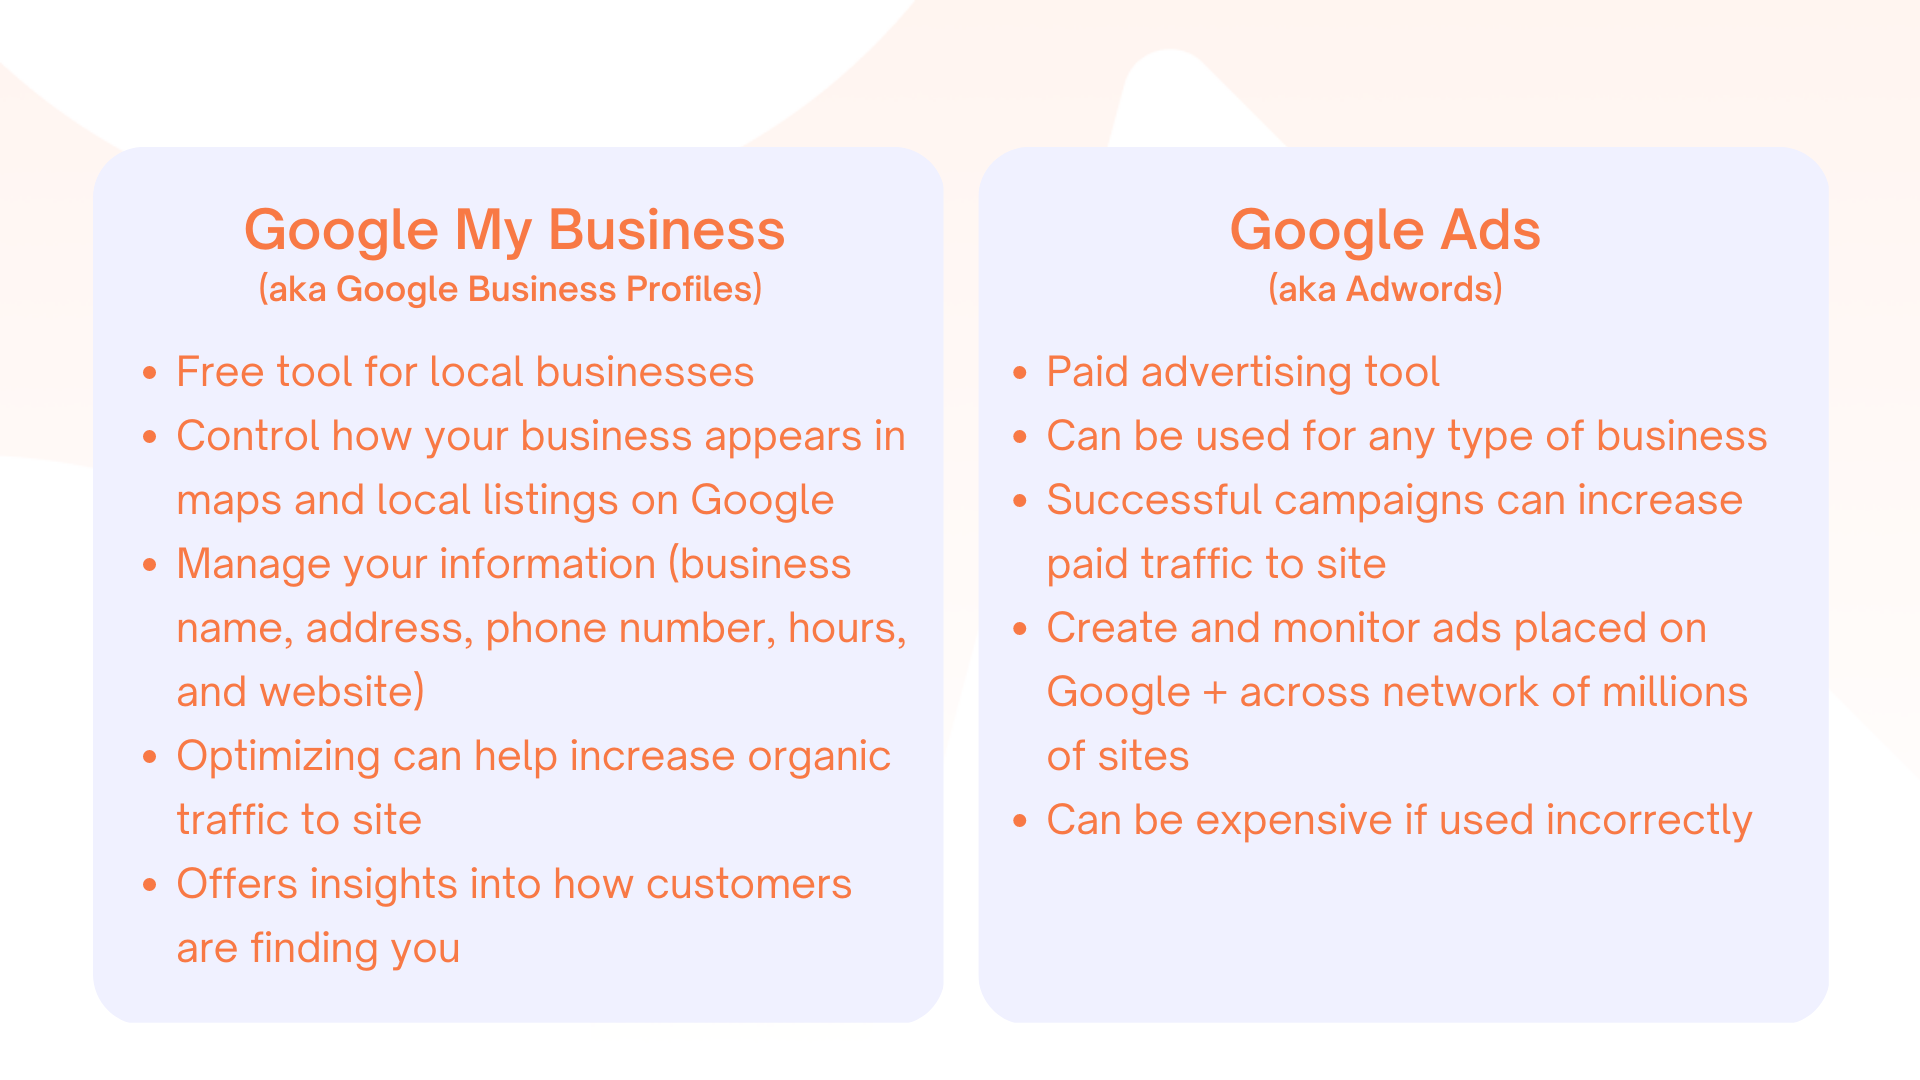 HOW TO Connect Google My Business to Google Ads